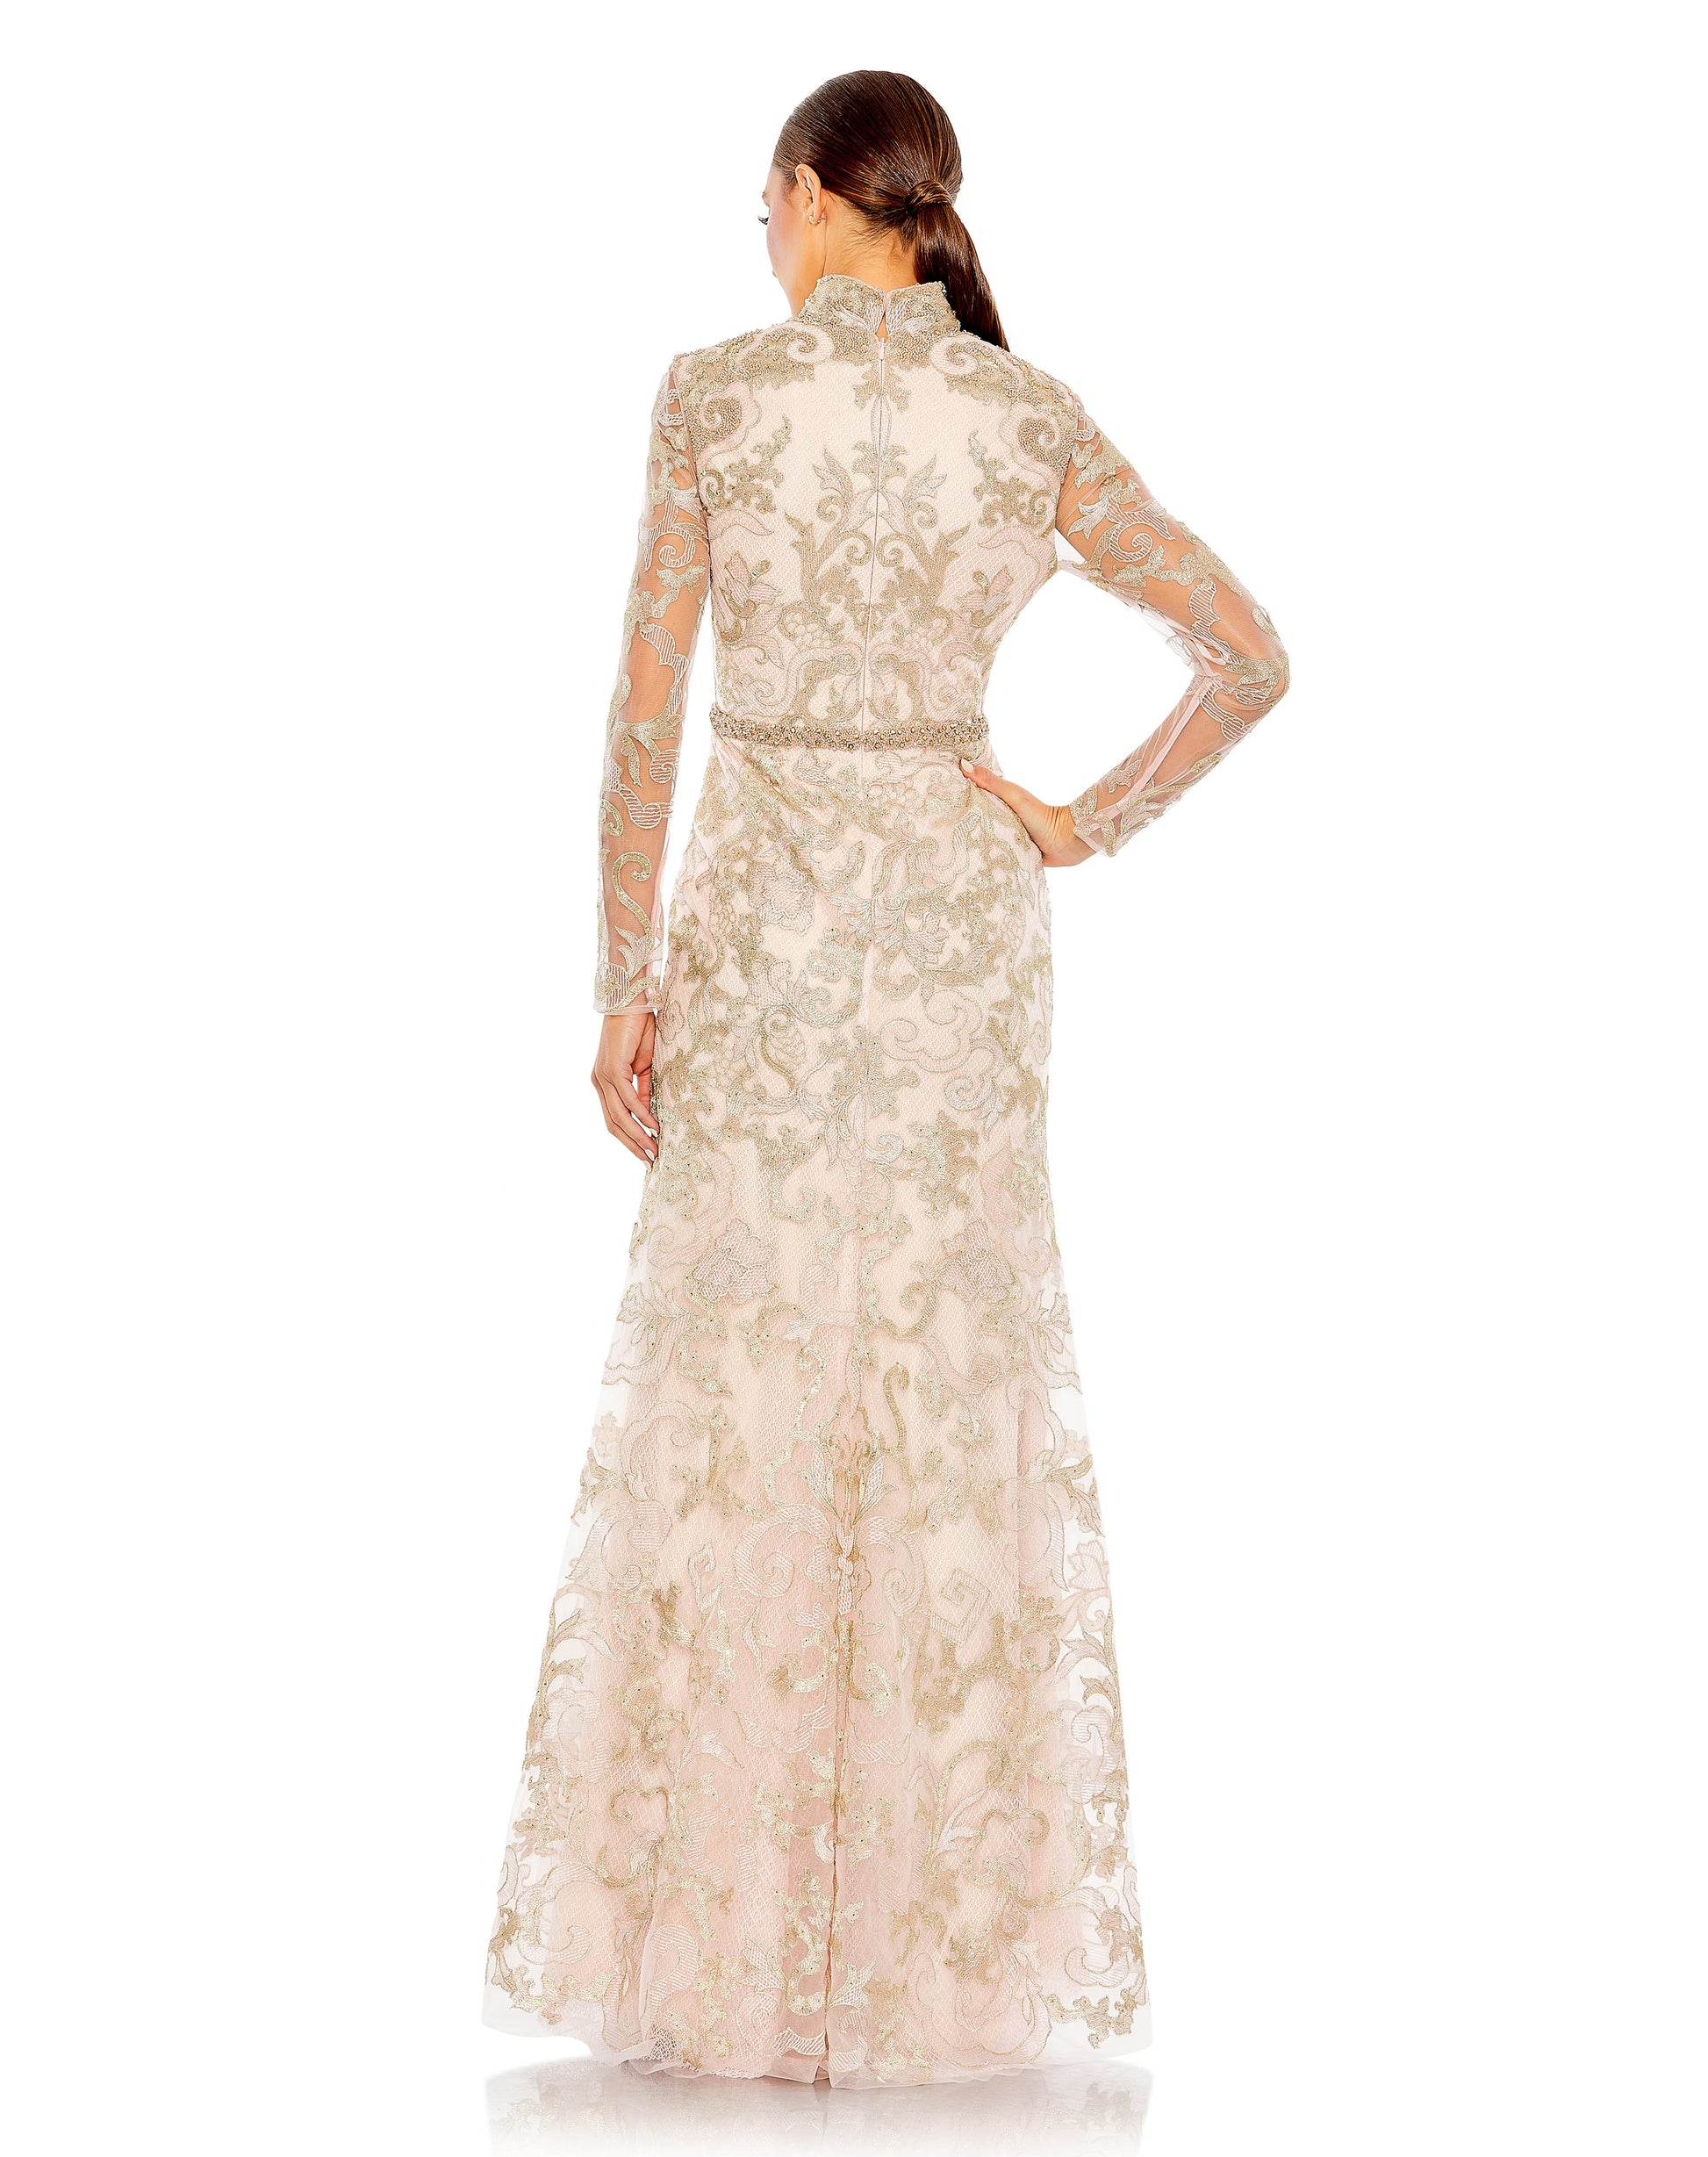 Long sleeve v-neck gown with decorative metallic-gold applique and embroidered detail throughout. Natural waist is accent by a hand-beaded belt. Mac Duggal Partially Lined Back Zipper 100% Polyester Long Sleeve Full Length V-Neck Style #11165